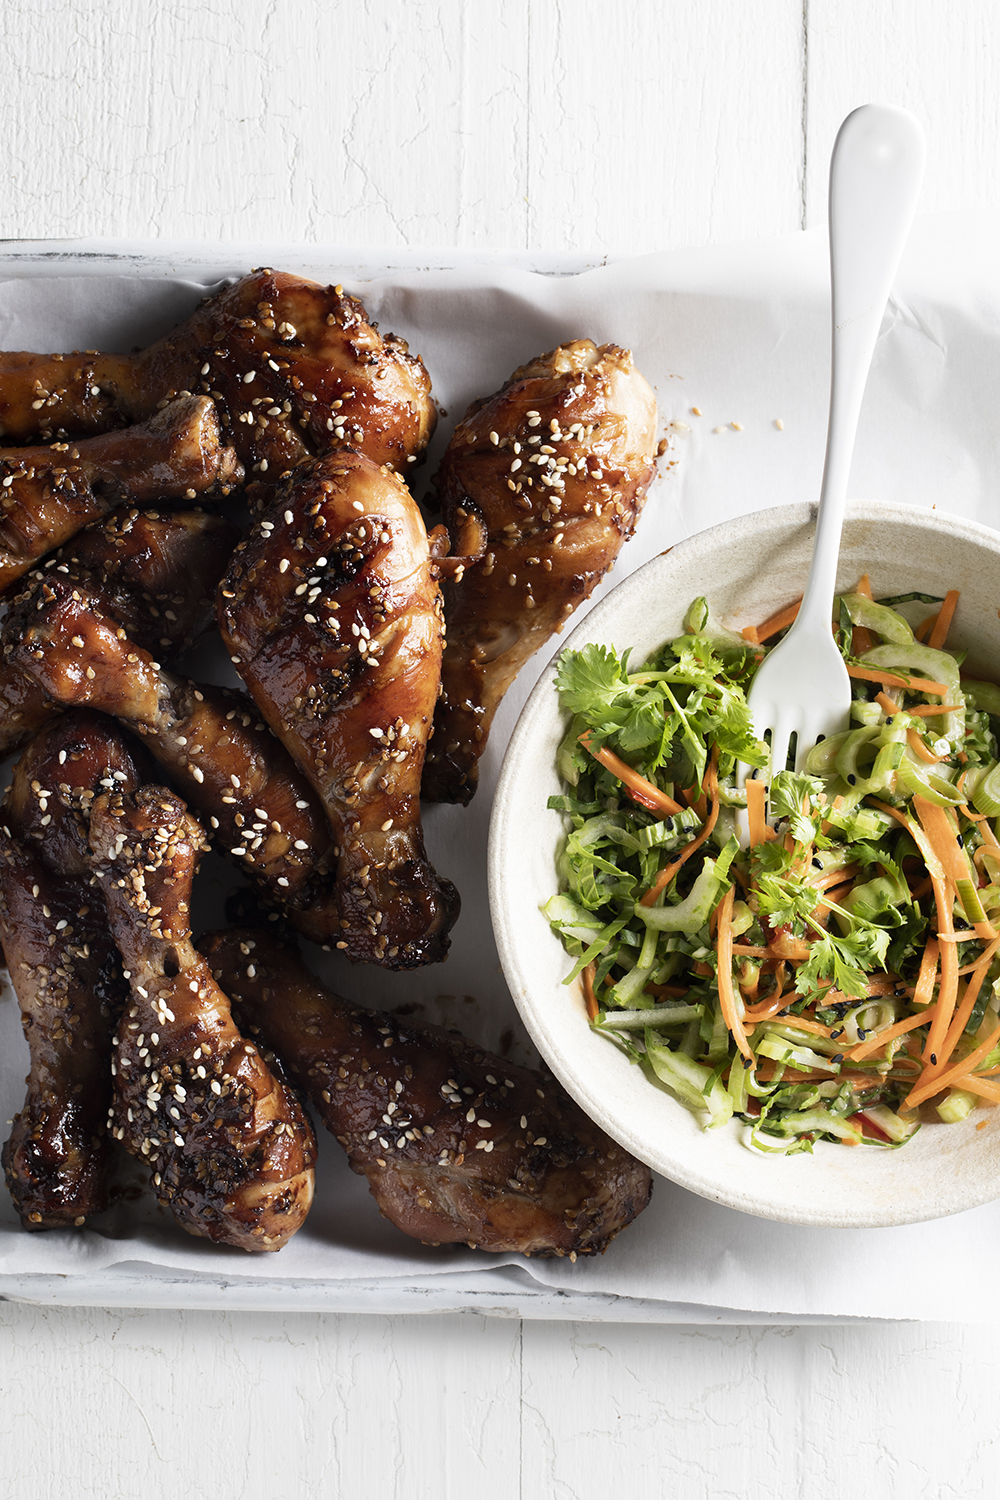 Try out this tasty Teriyaki Chicken Drumsticks recipe from New World